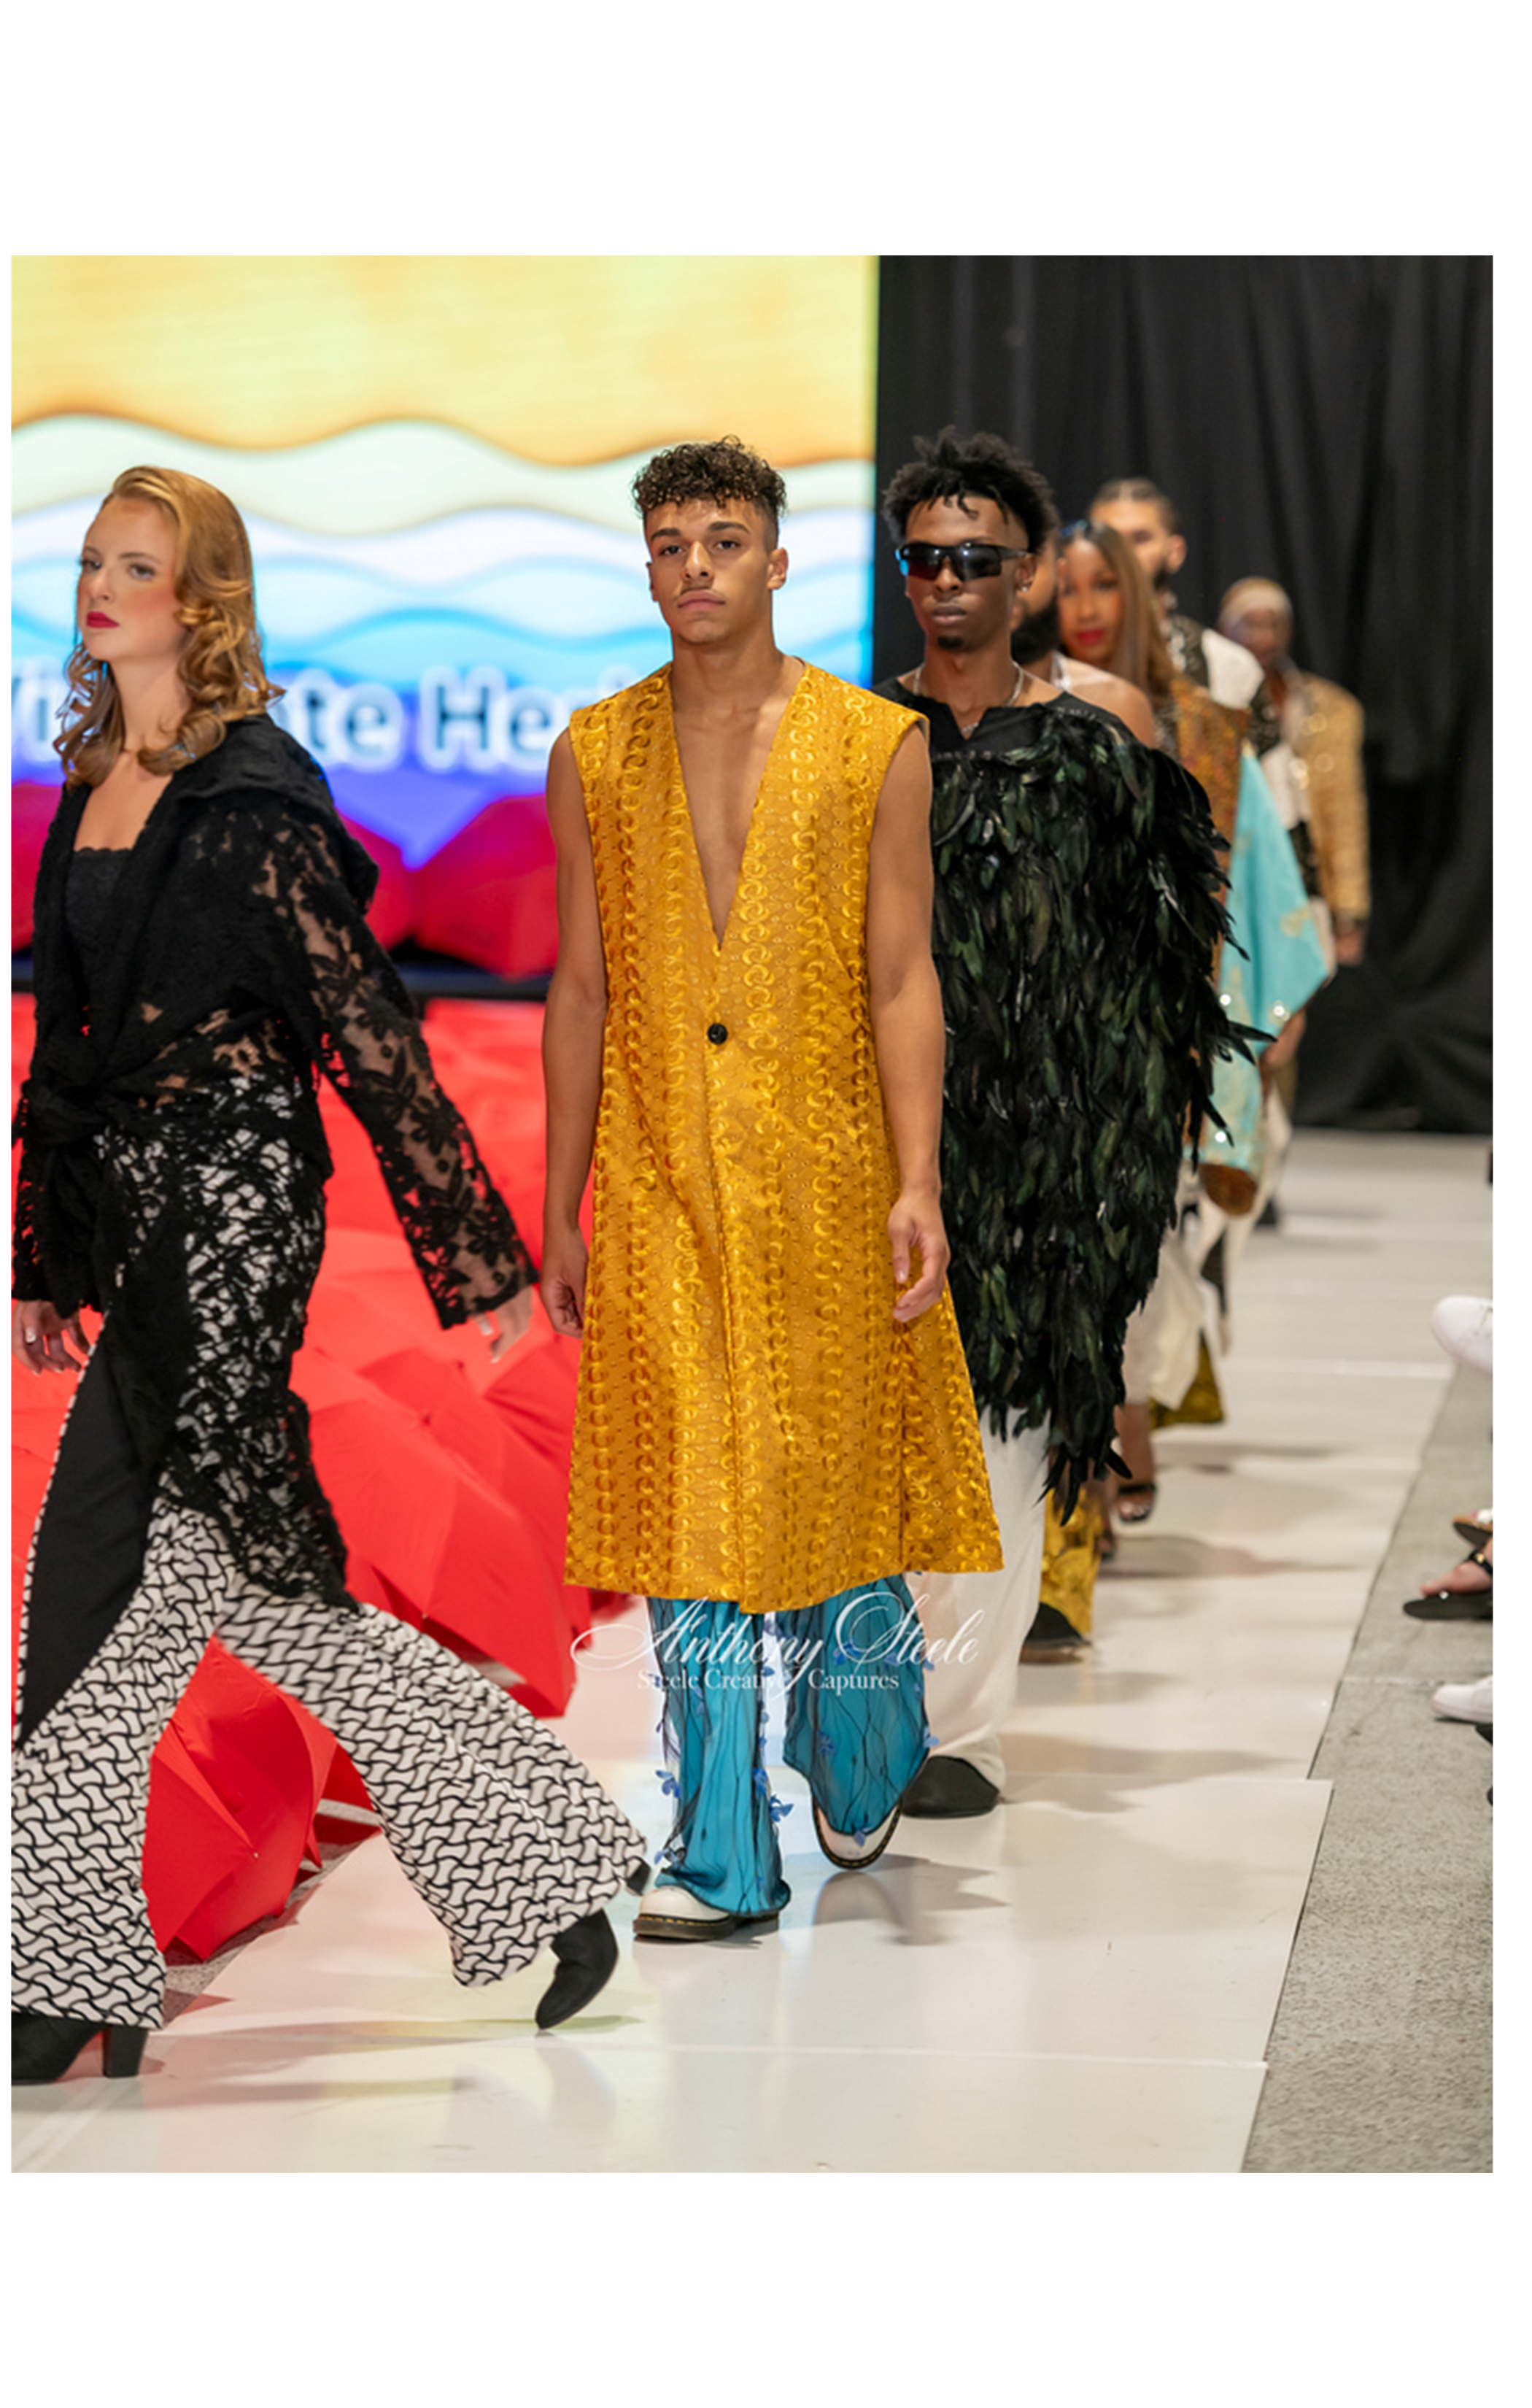 Unveiling Elegance: Atlantic City Fashion Week's Influence on South Jersey Culture